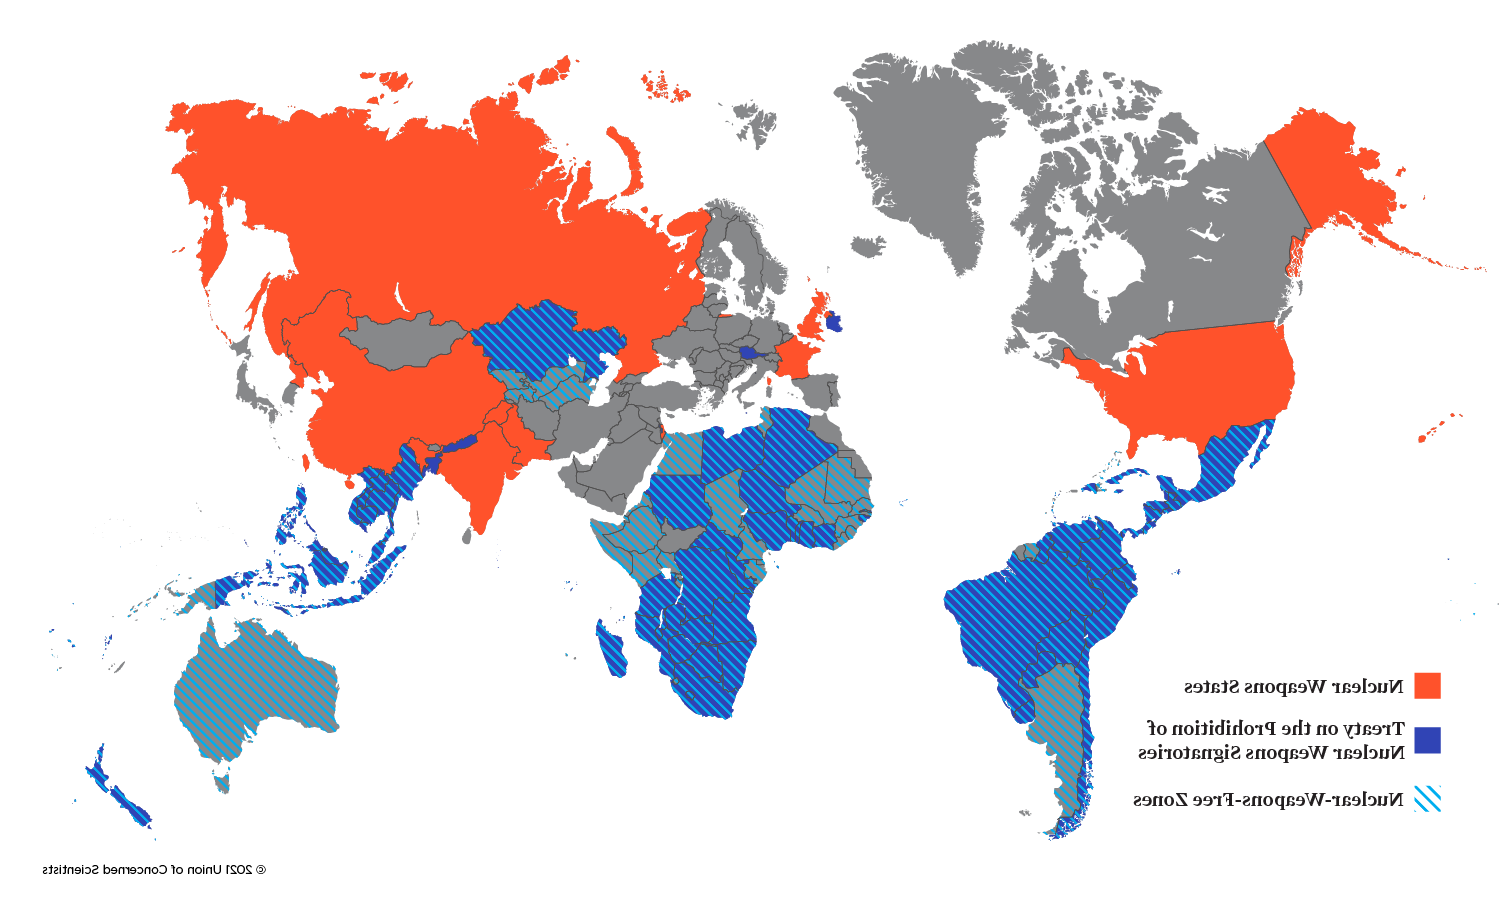 World map showing nuclear weapons states, signatories of TPNW, and countries that are nuclear-weapons-free zones